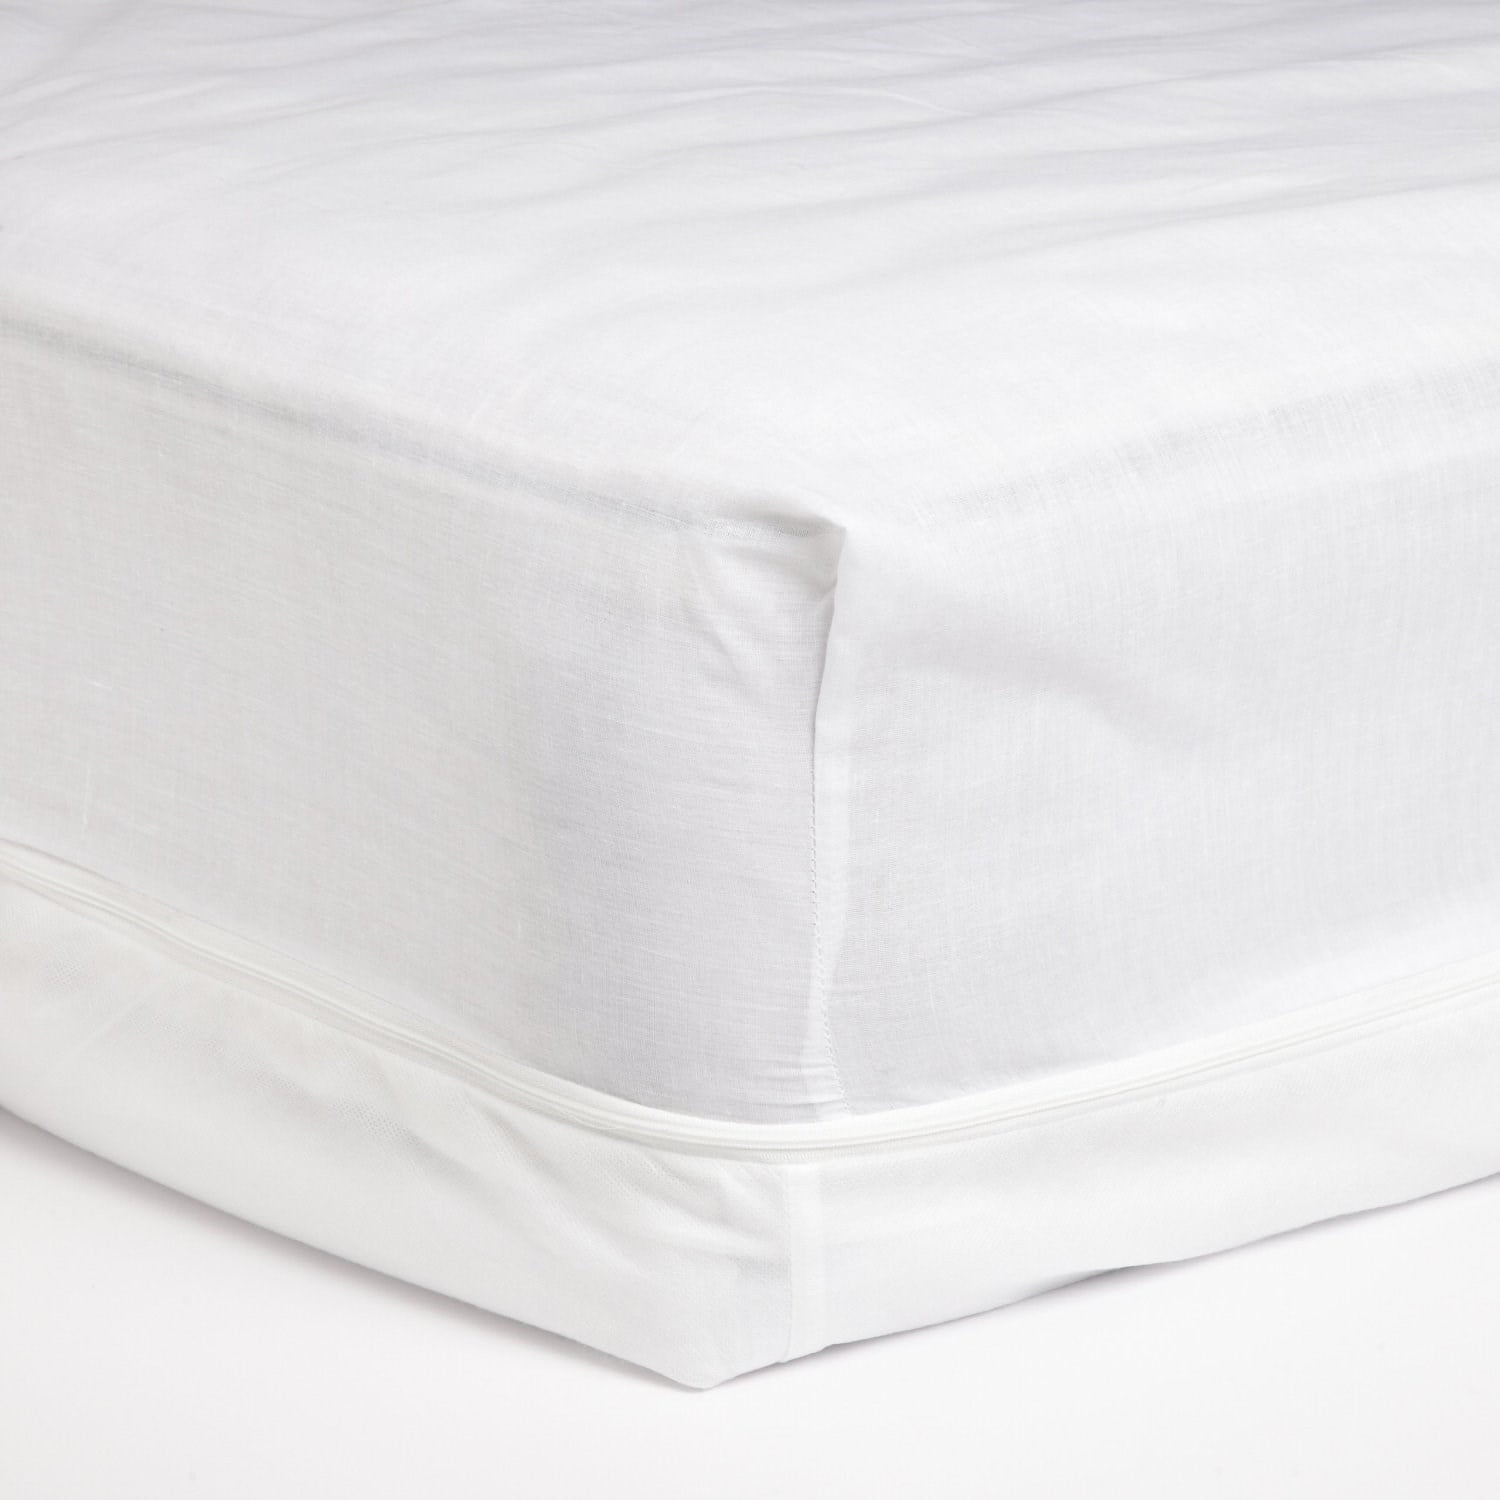 Adorable Poly-Cotton Touch Zippered Mattress Protector, White, Full ...